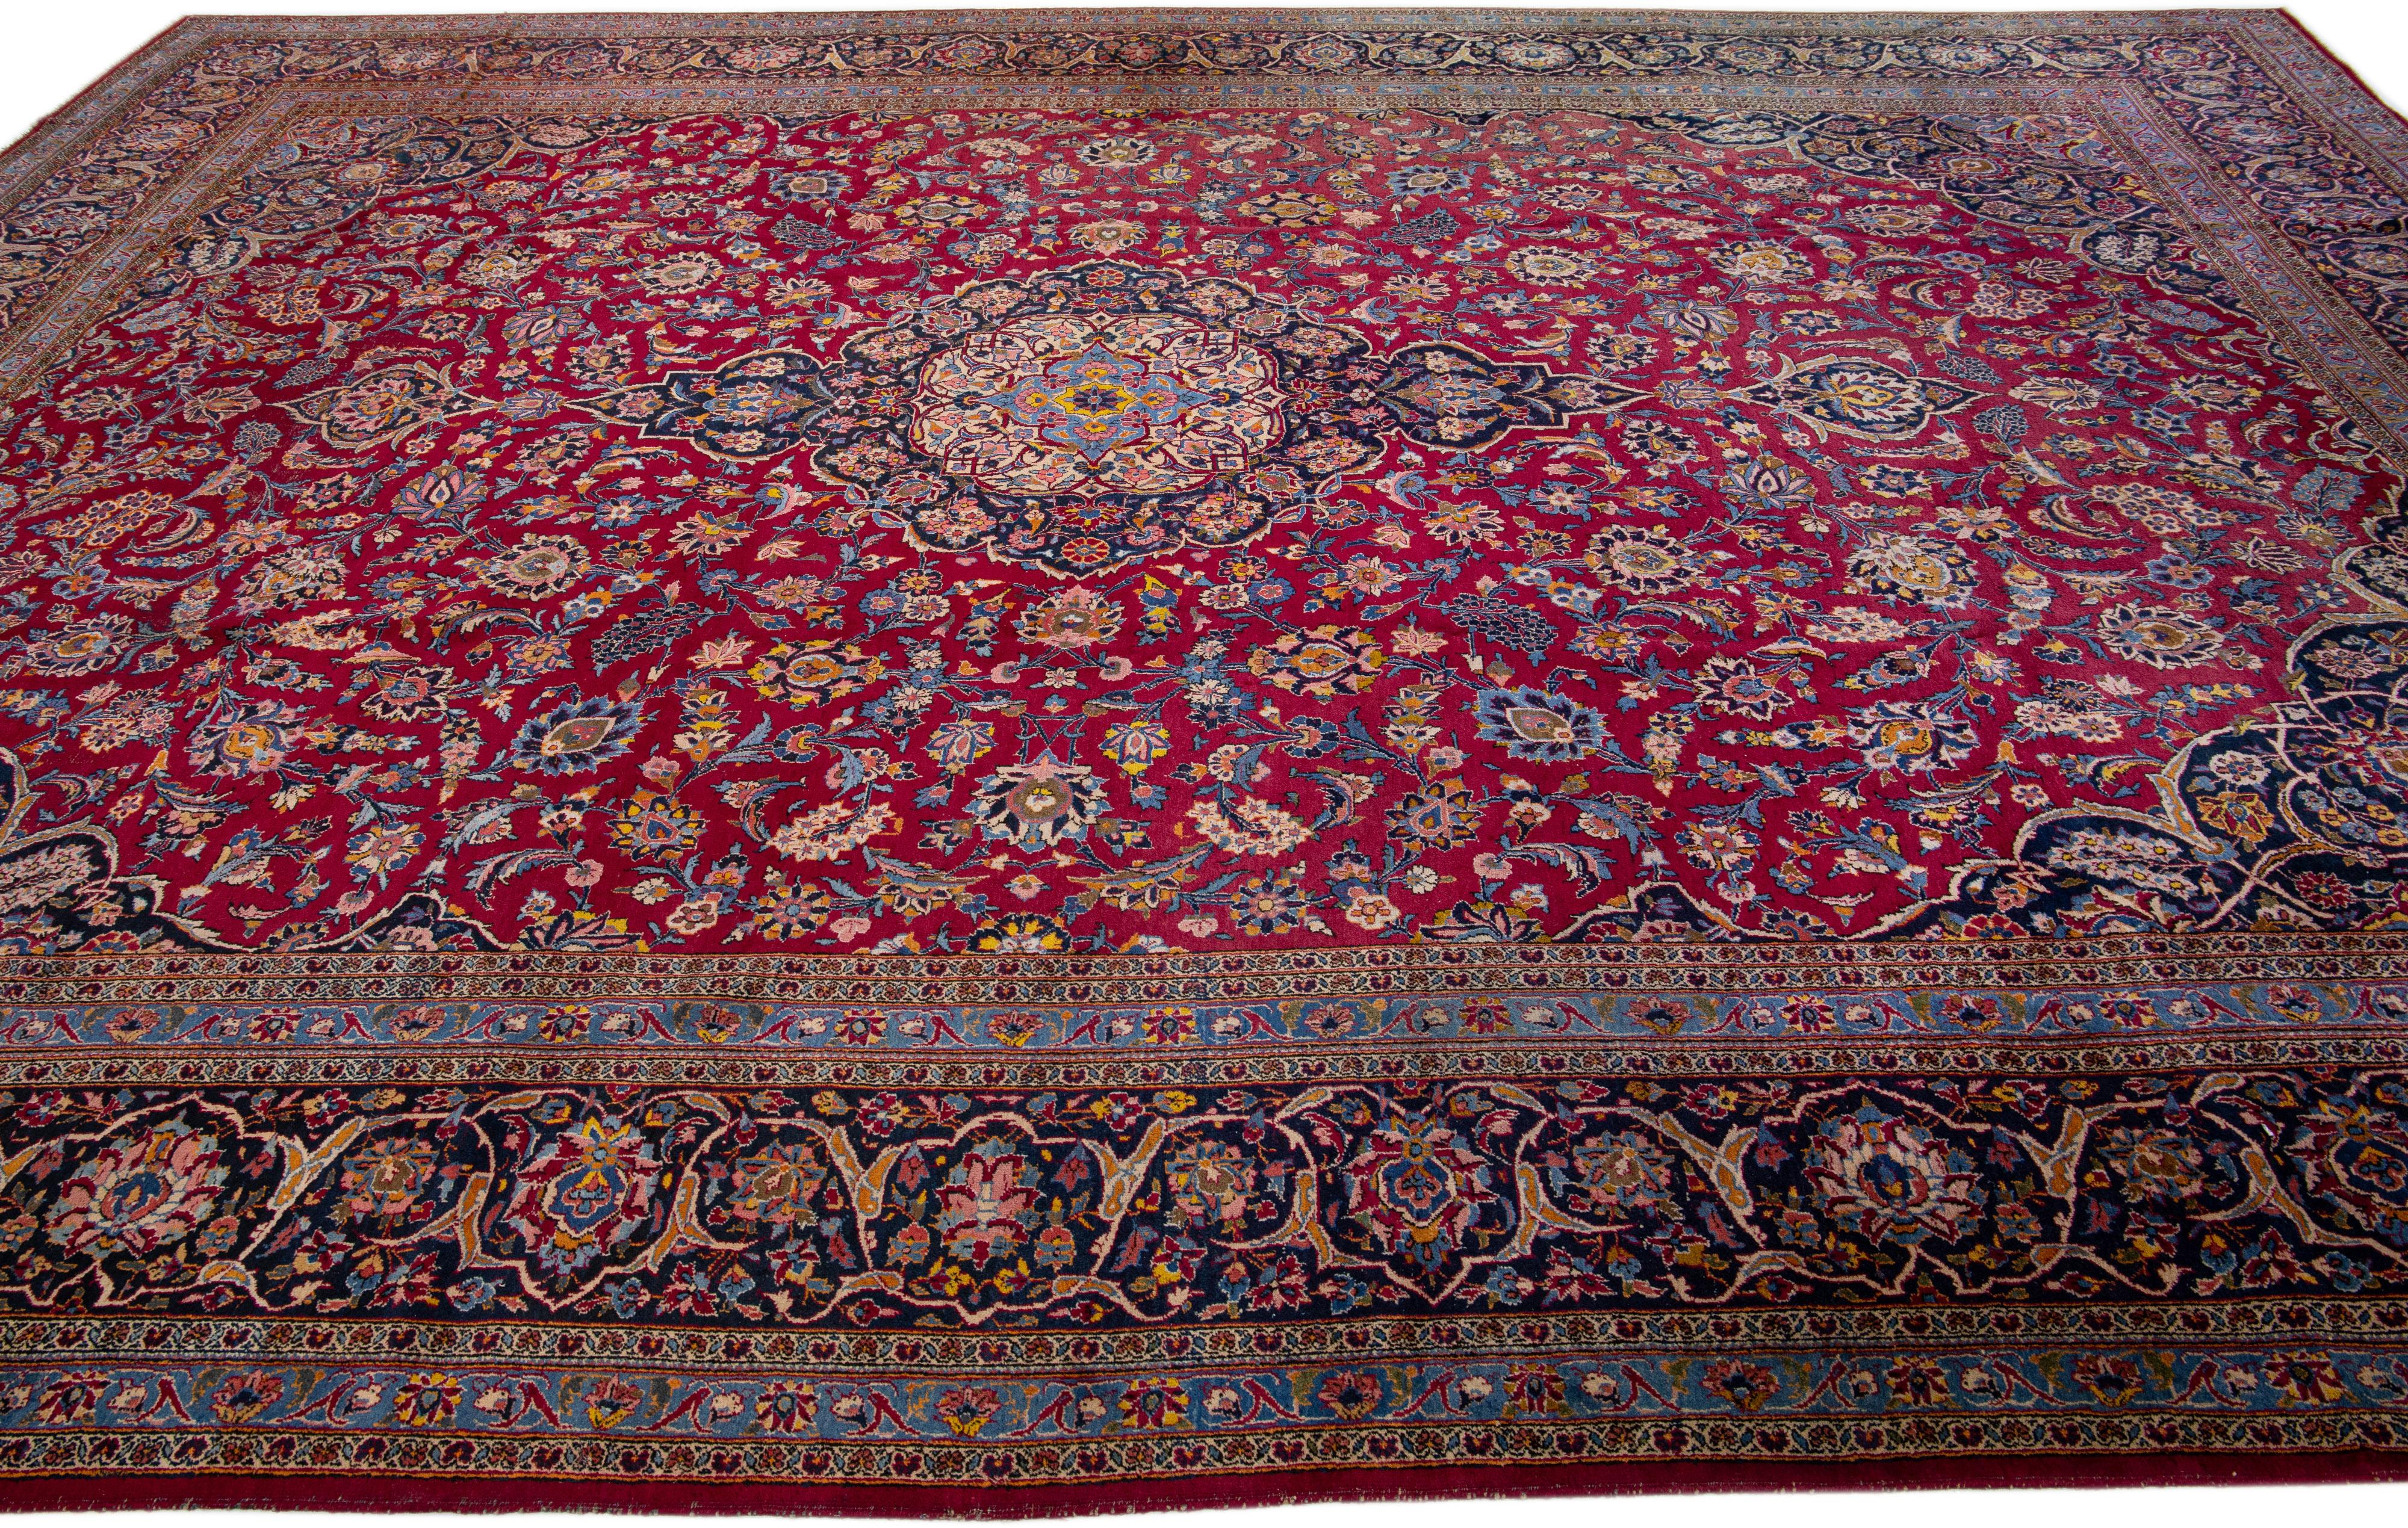 20th Century Oversize Antique Persian Kashan Red Wool Rug with Medallion Motif For Sale